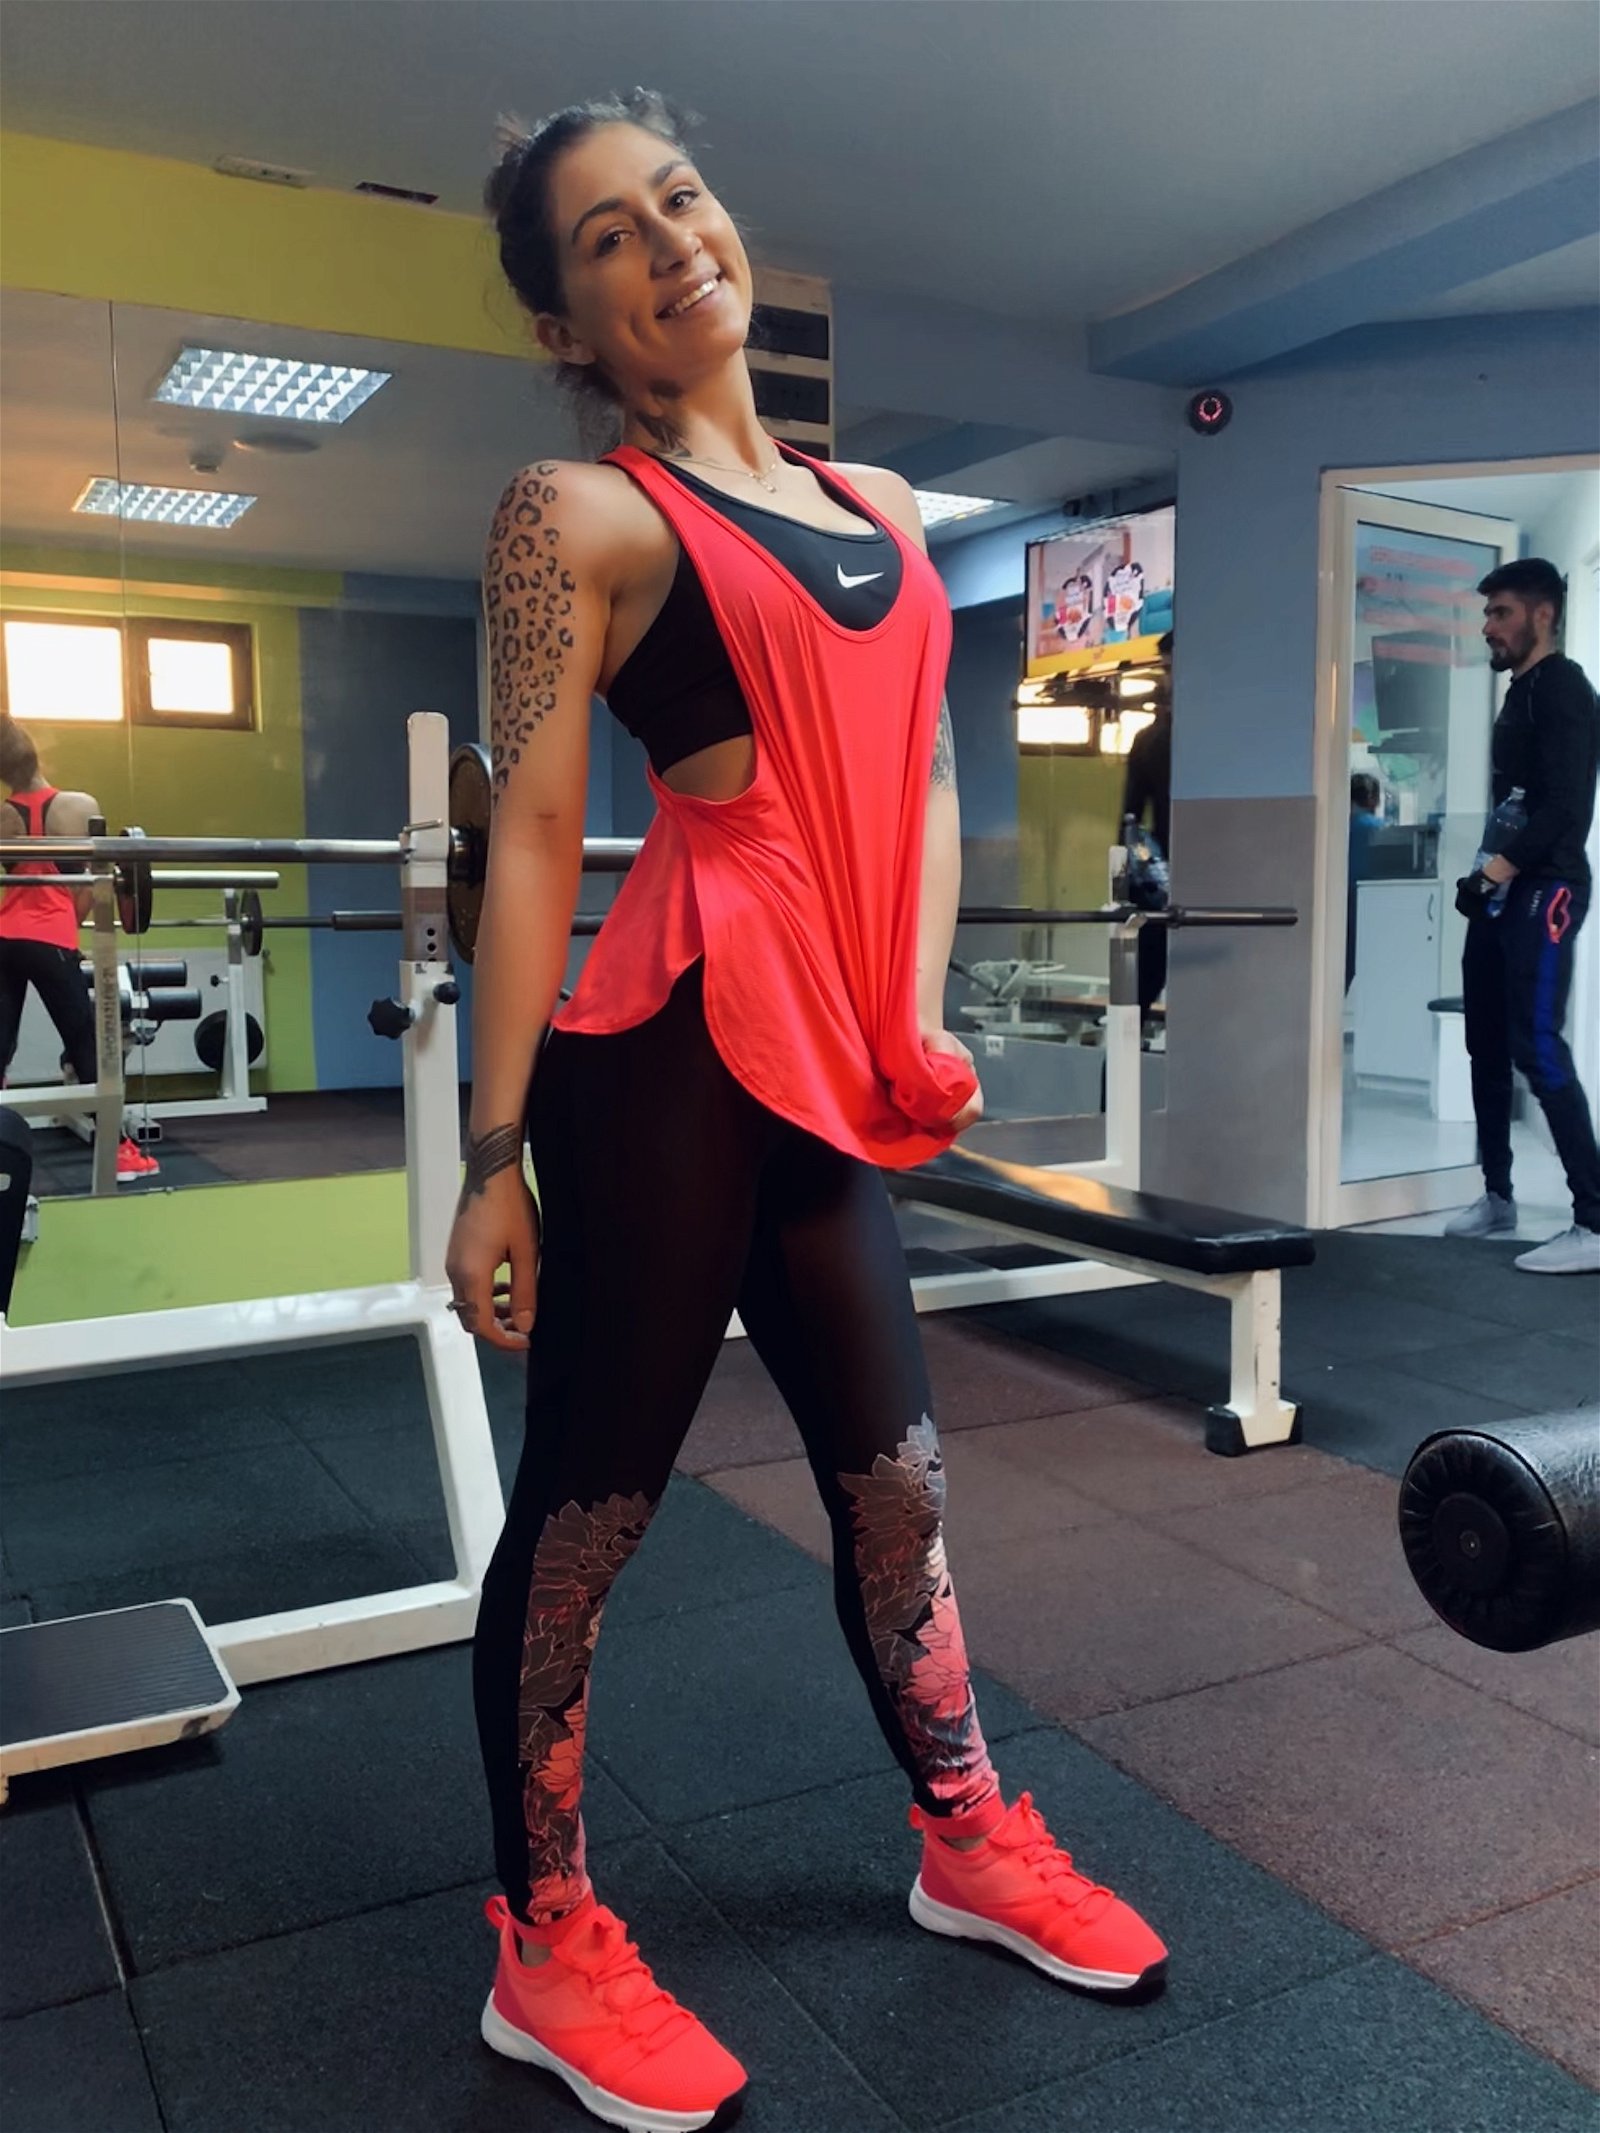 Photo by Aysha Rosse with the username @AyshaRosse, who is a star user,  February 24, 2020 at 3:05 PM. The post is about the topic GYM SLUTS and the text says 'I ❤️ GYM ! #Sharesome #SharesomeLove #Hotgirl #Brunette #Tatto #Pretty #Adorable'